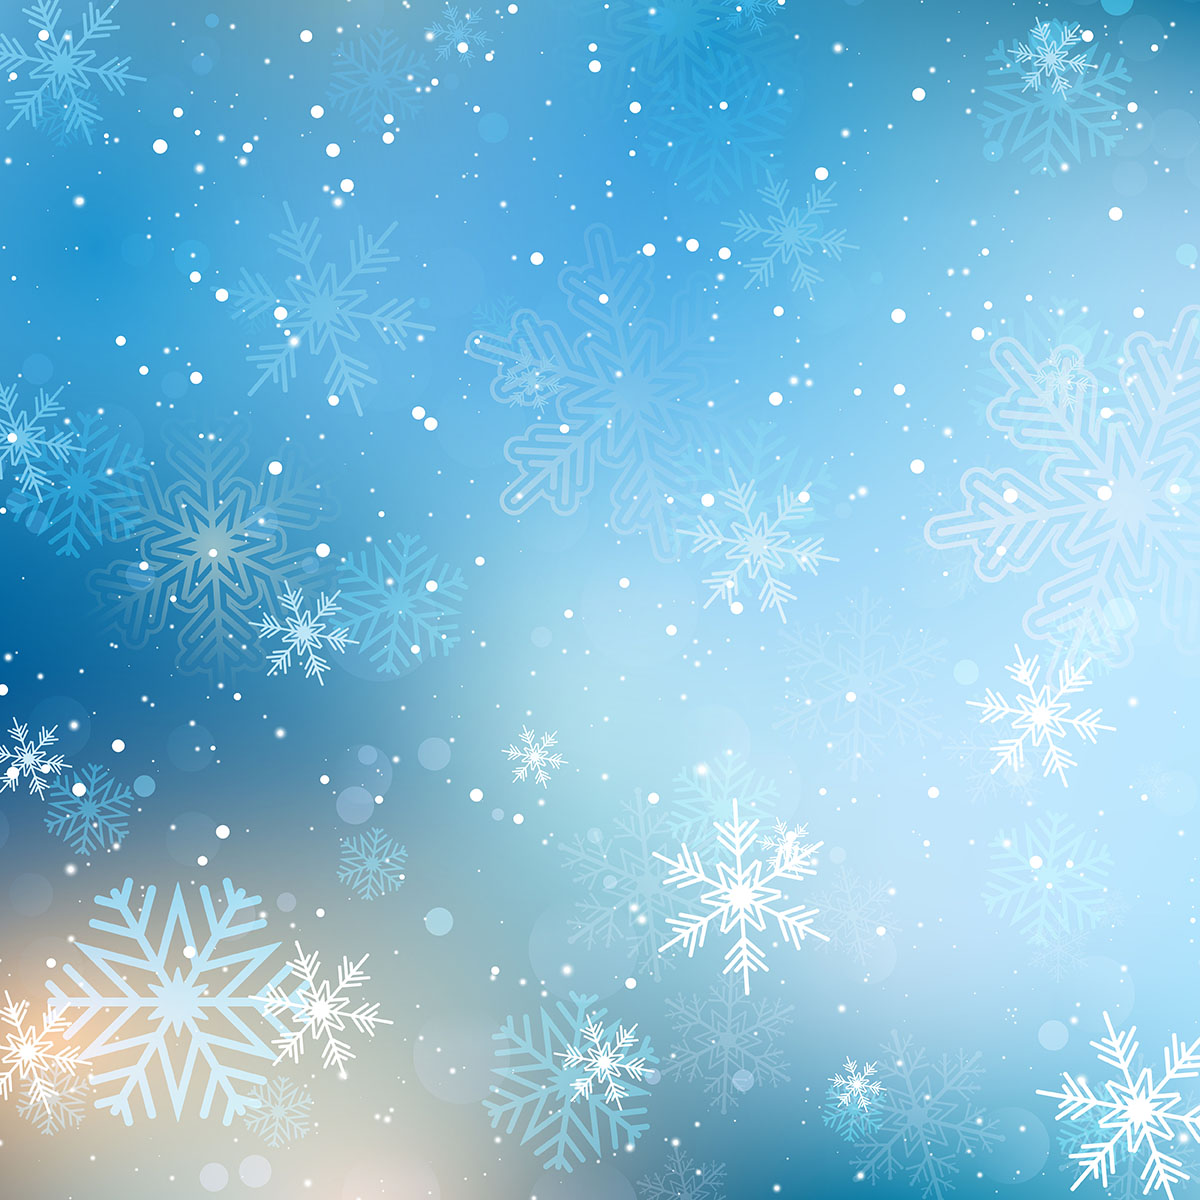 Christmas snowflake background 210657 Download Free